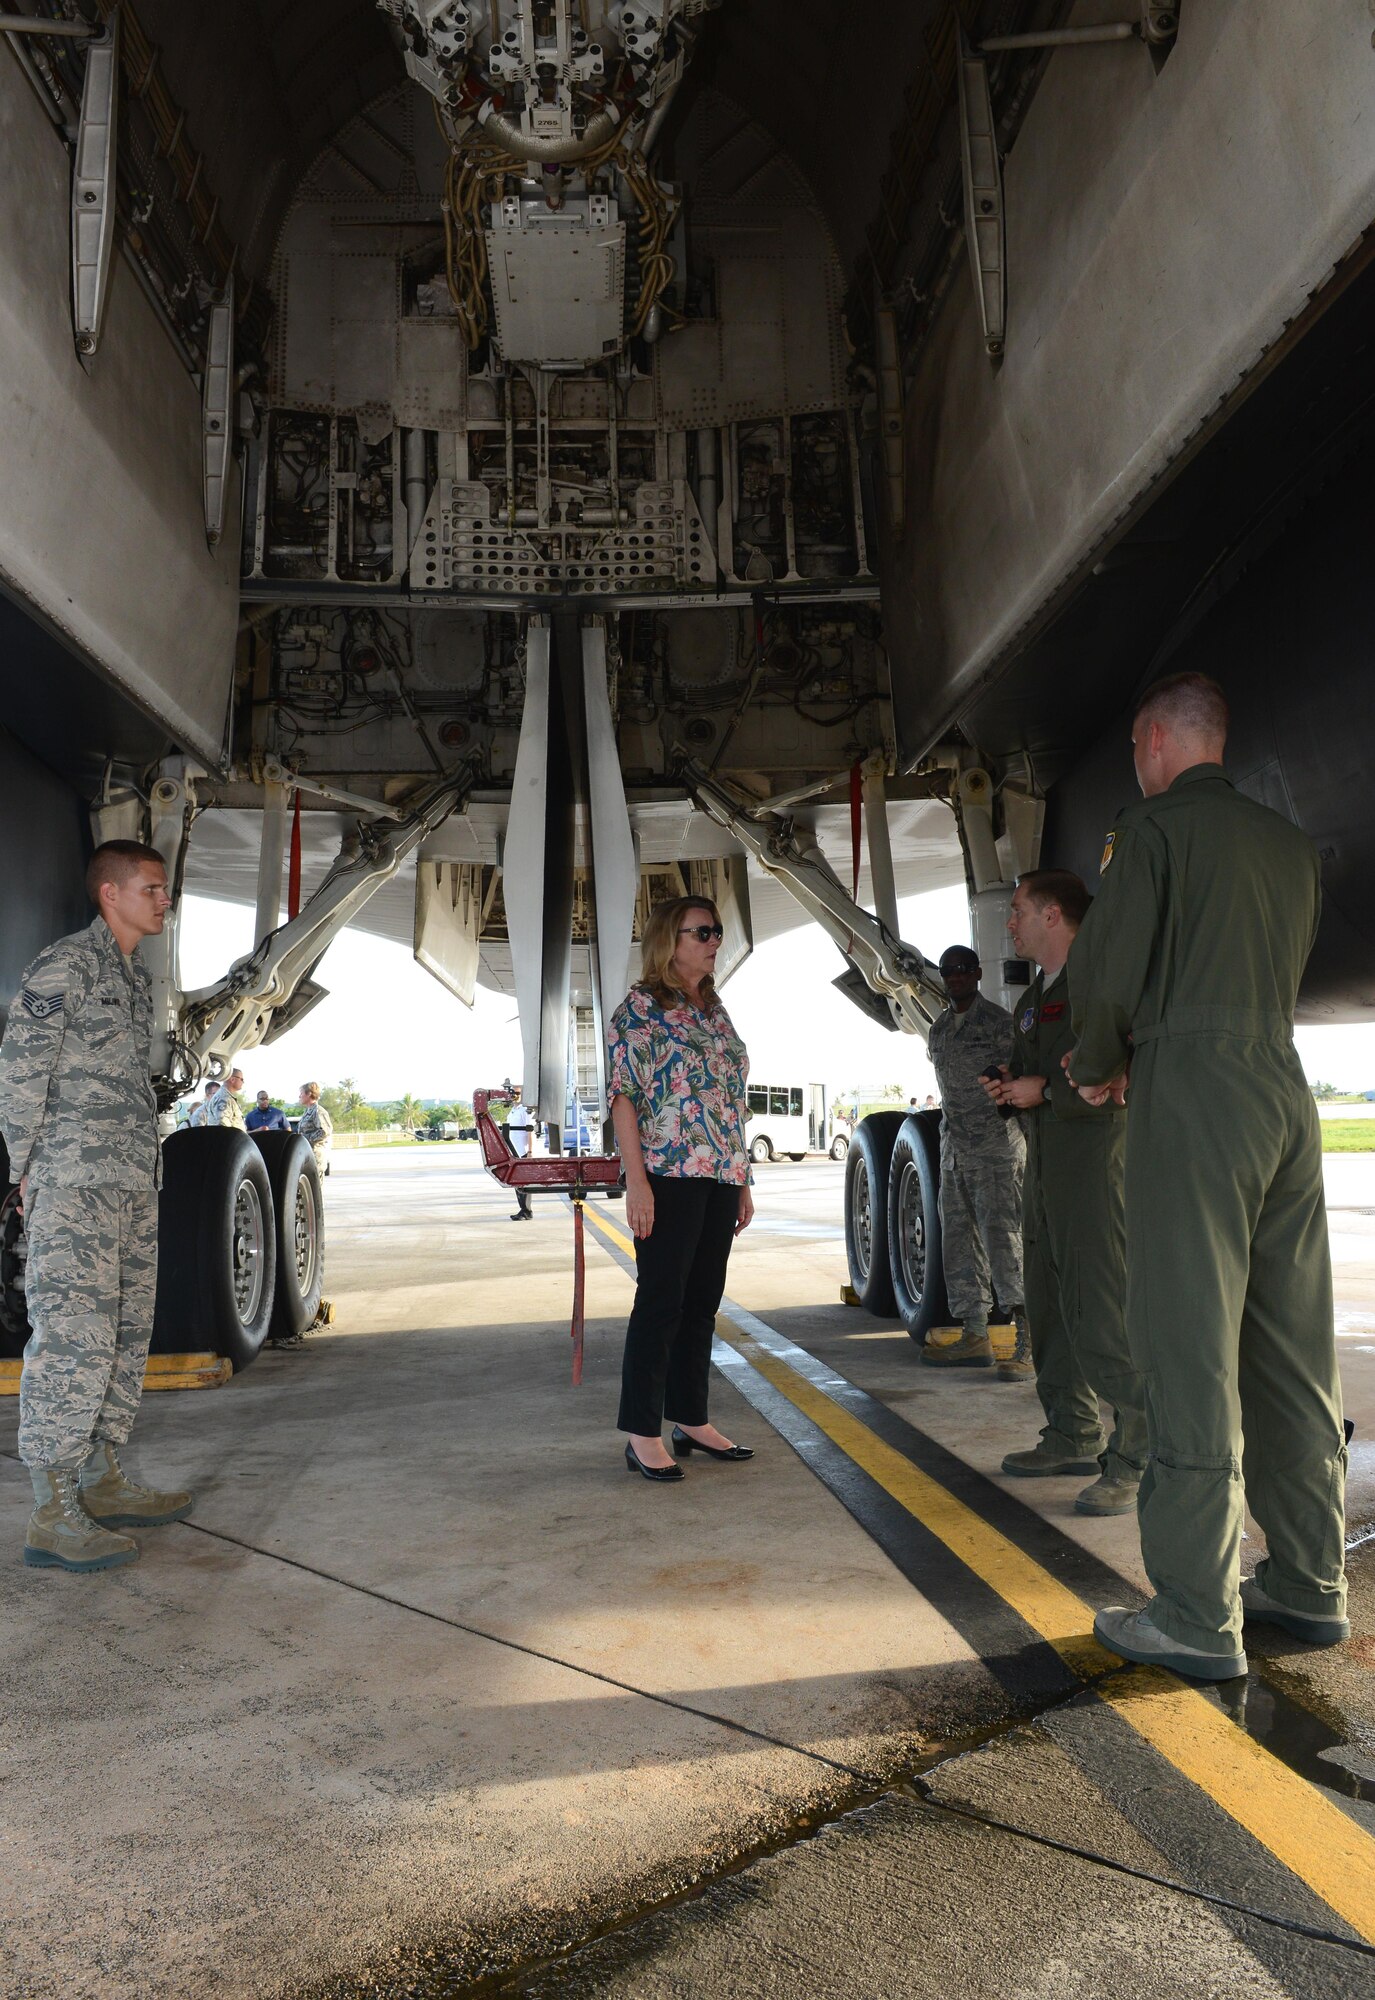 Secretary of the Air Force Deborah Lee James learns about the capabilities of the B-1B Lancer during a visit Aug. 30, 2016, at Andersen Air Force Base, Guam. During her visit, James met with Airmen from the 34th Expeditionary Bomb Squadron and wing leadership to learn about the Continuous Bomber Presence mission. (U.S. Air Force photo by Airman 1st Class Arielle Vasquez/Released)